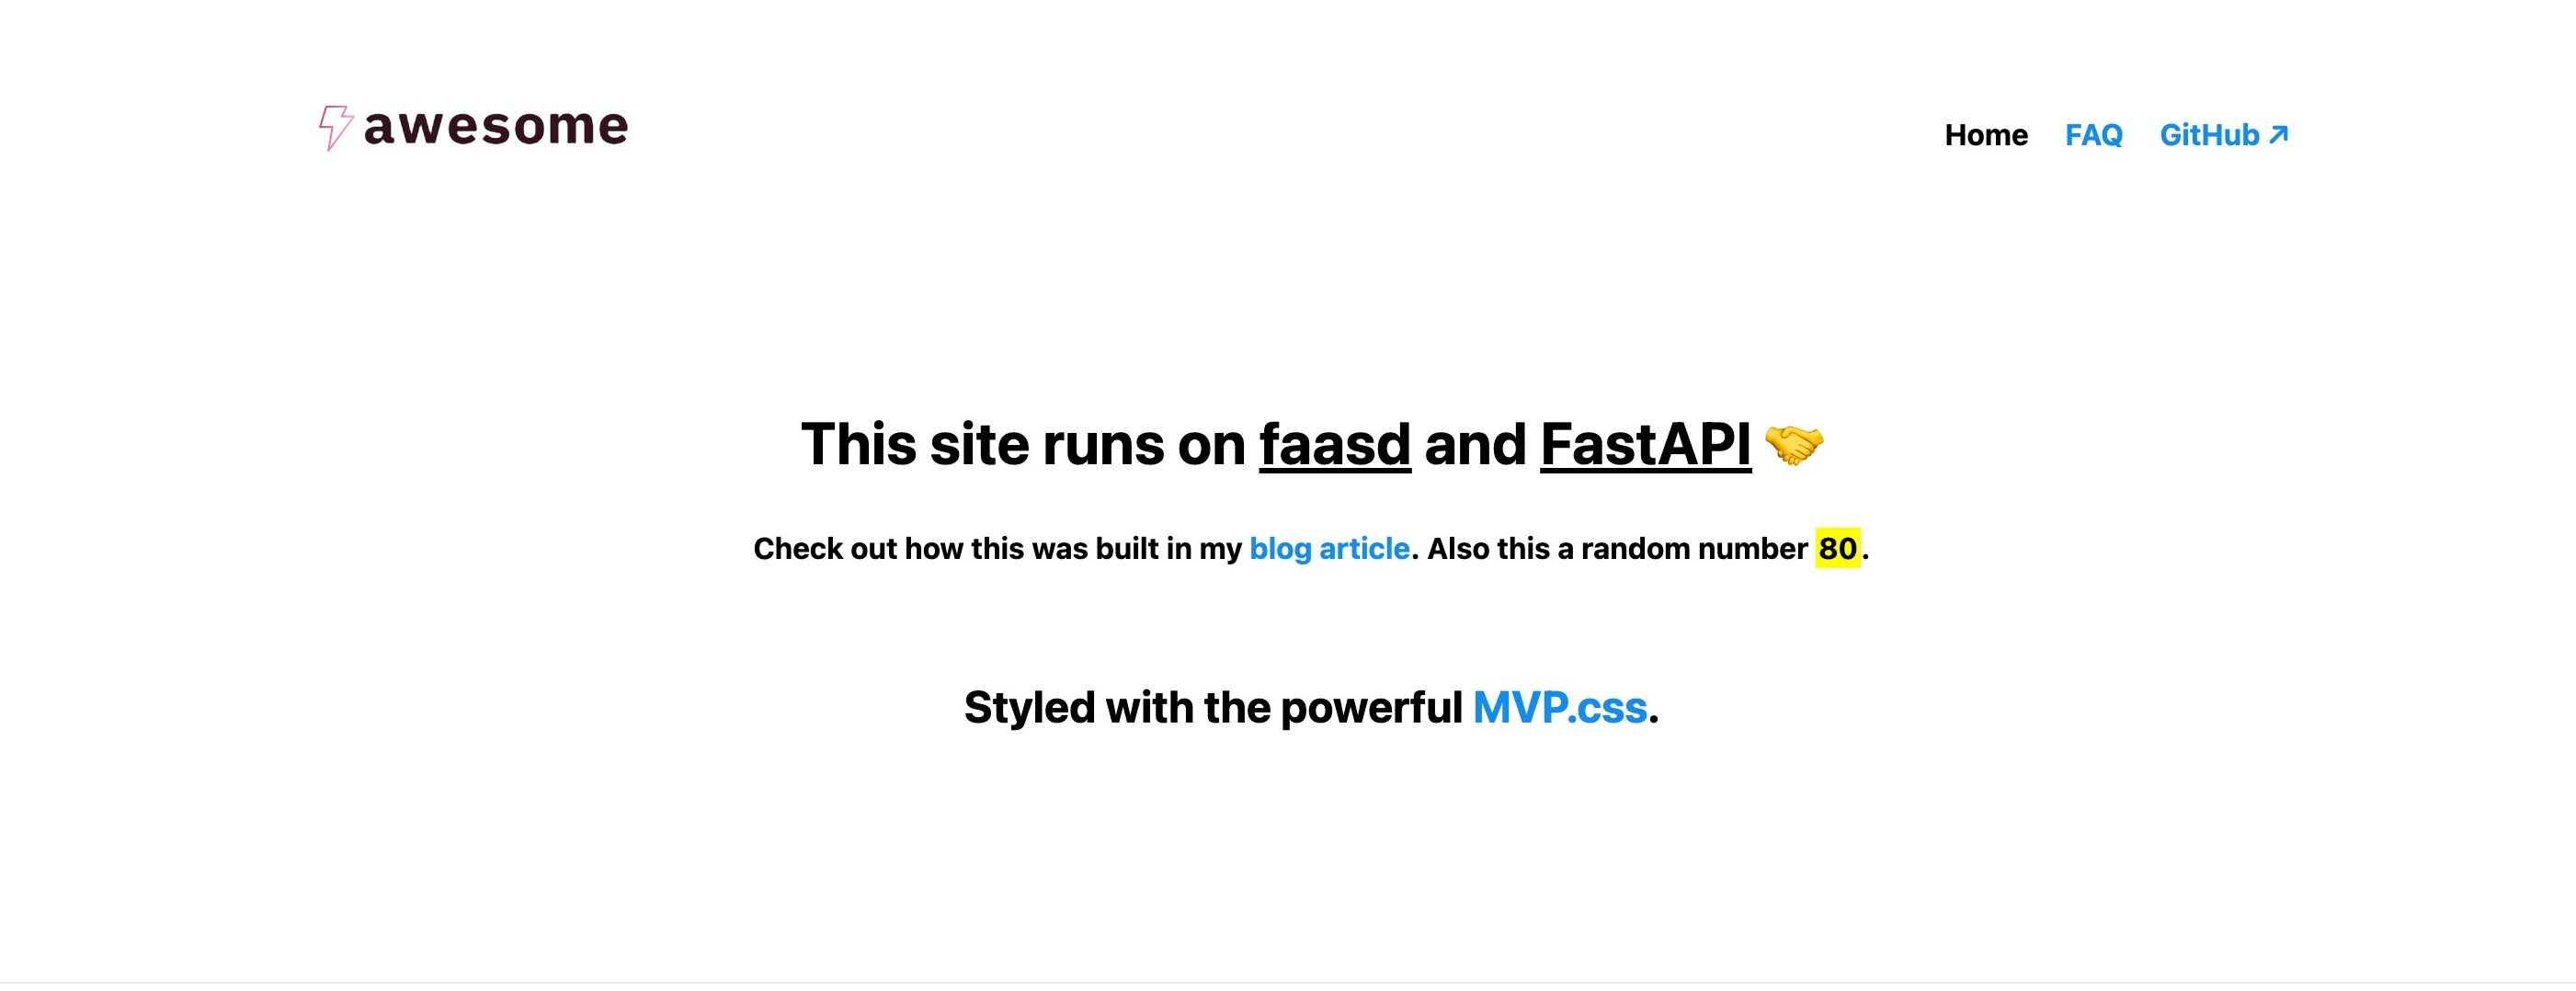 A FastAPI MVP deployed on faasd. Check out the demo at 👉 faasd-demo.alexfranz.com